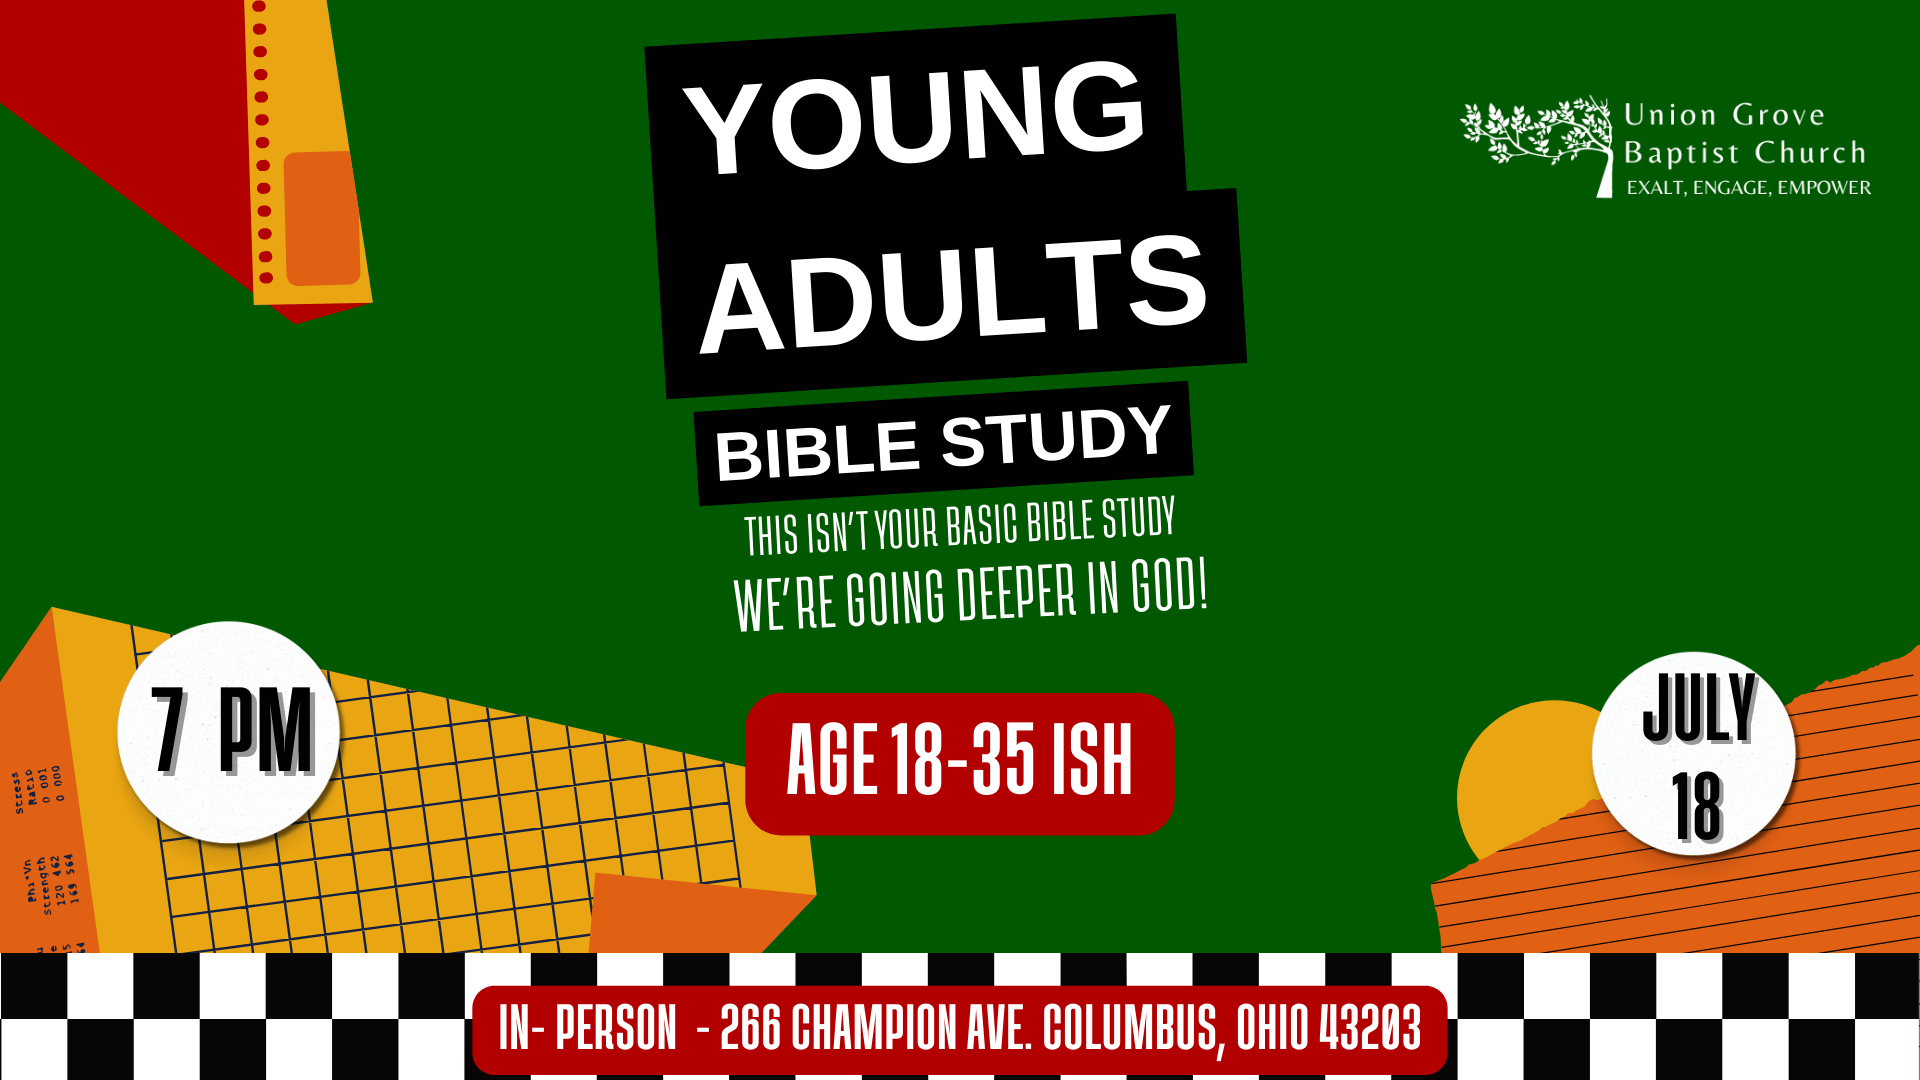 Young Adults Bible Study at 7 pm